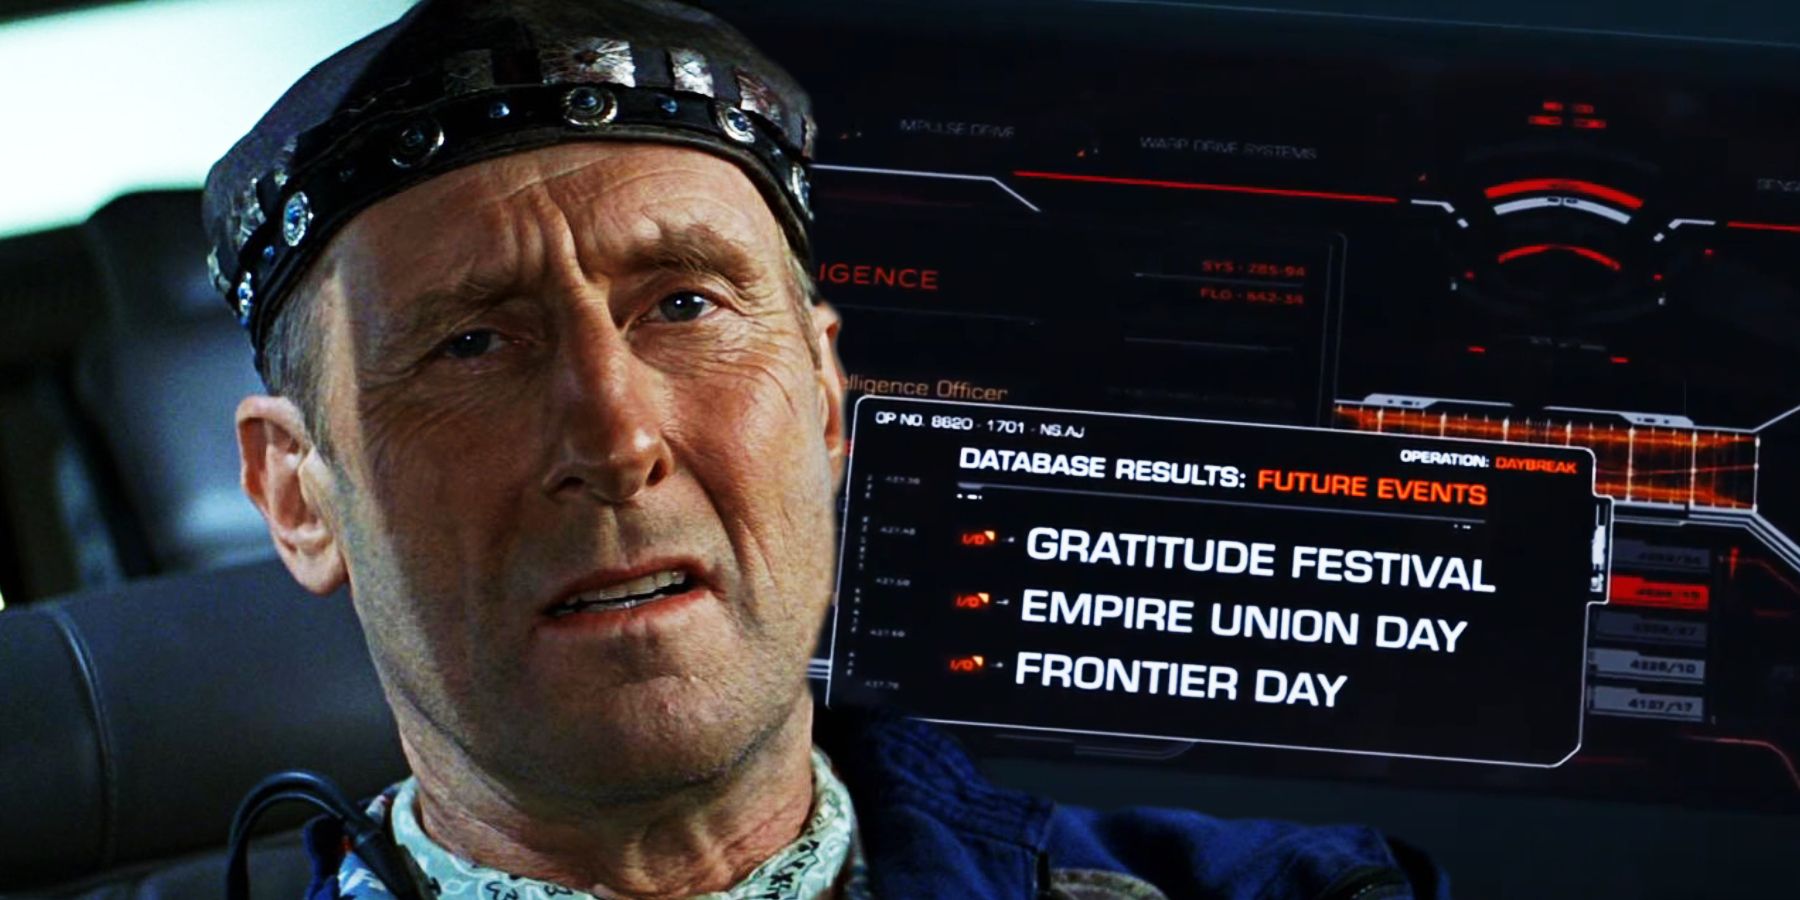 James Cromwell as Zefram Cochrane in Star Trek: First Contact and the Frontier Day calendar in Picard season 3